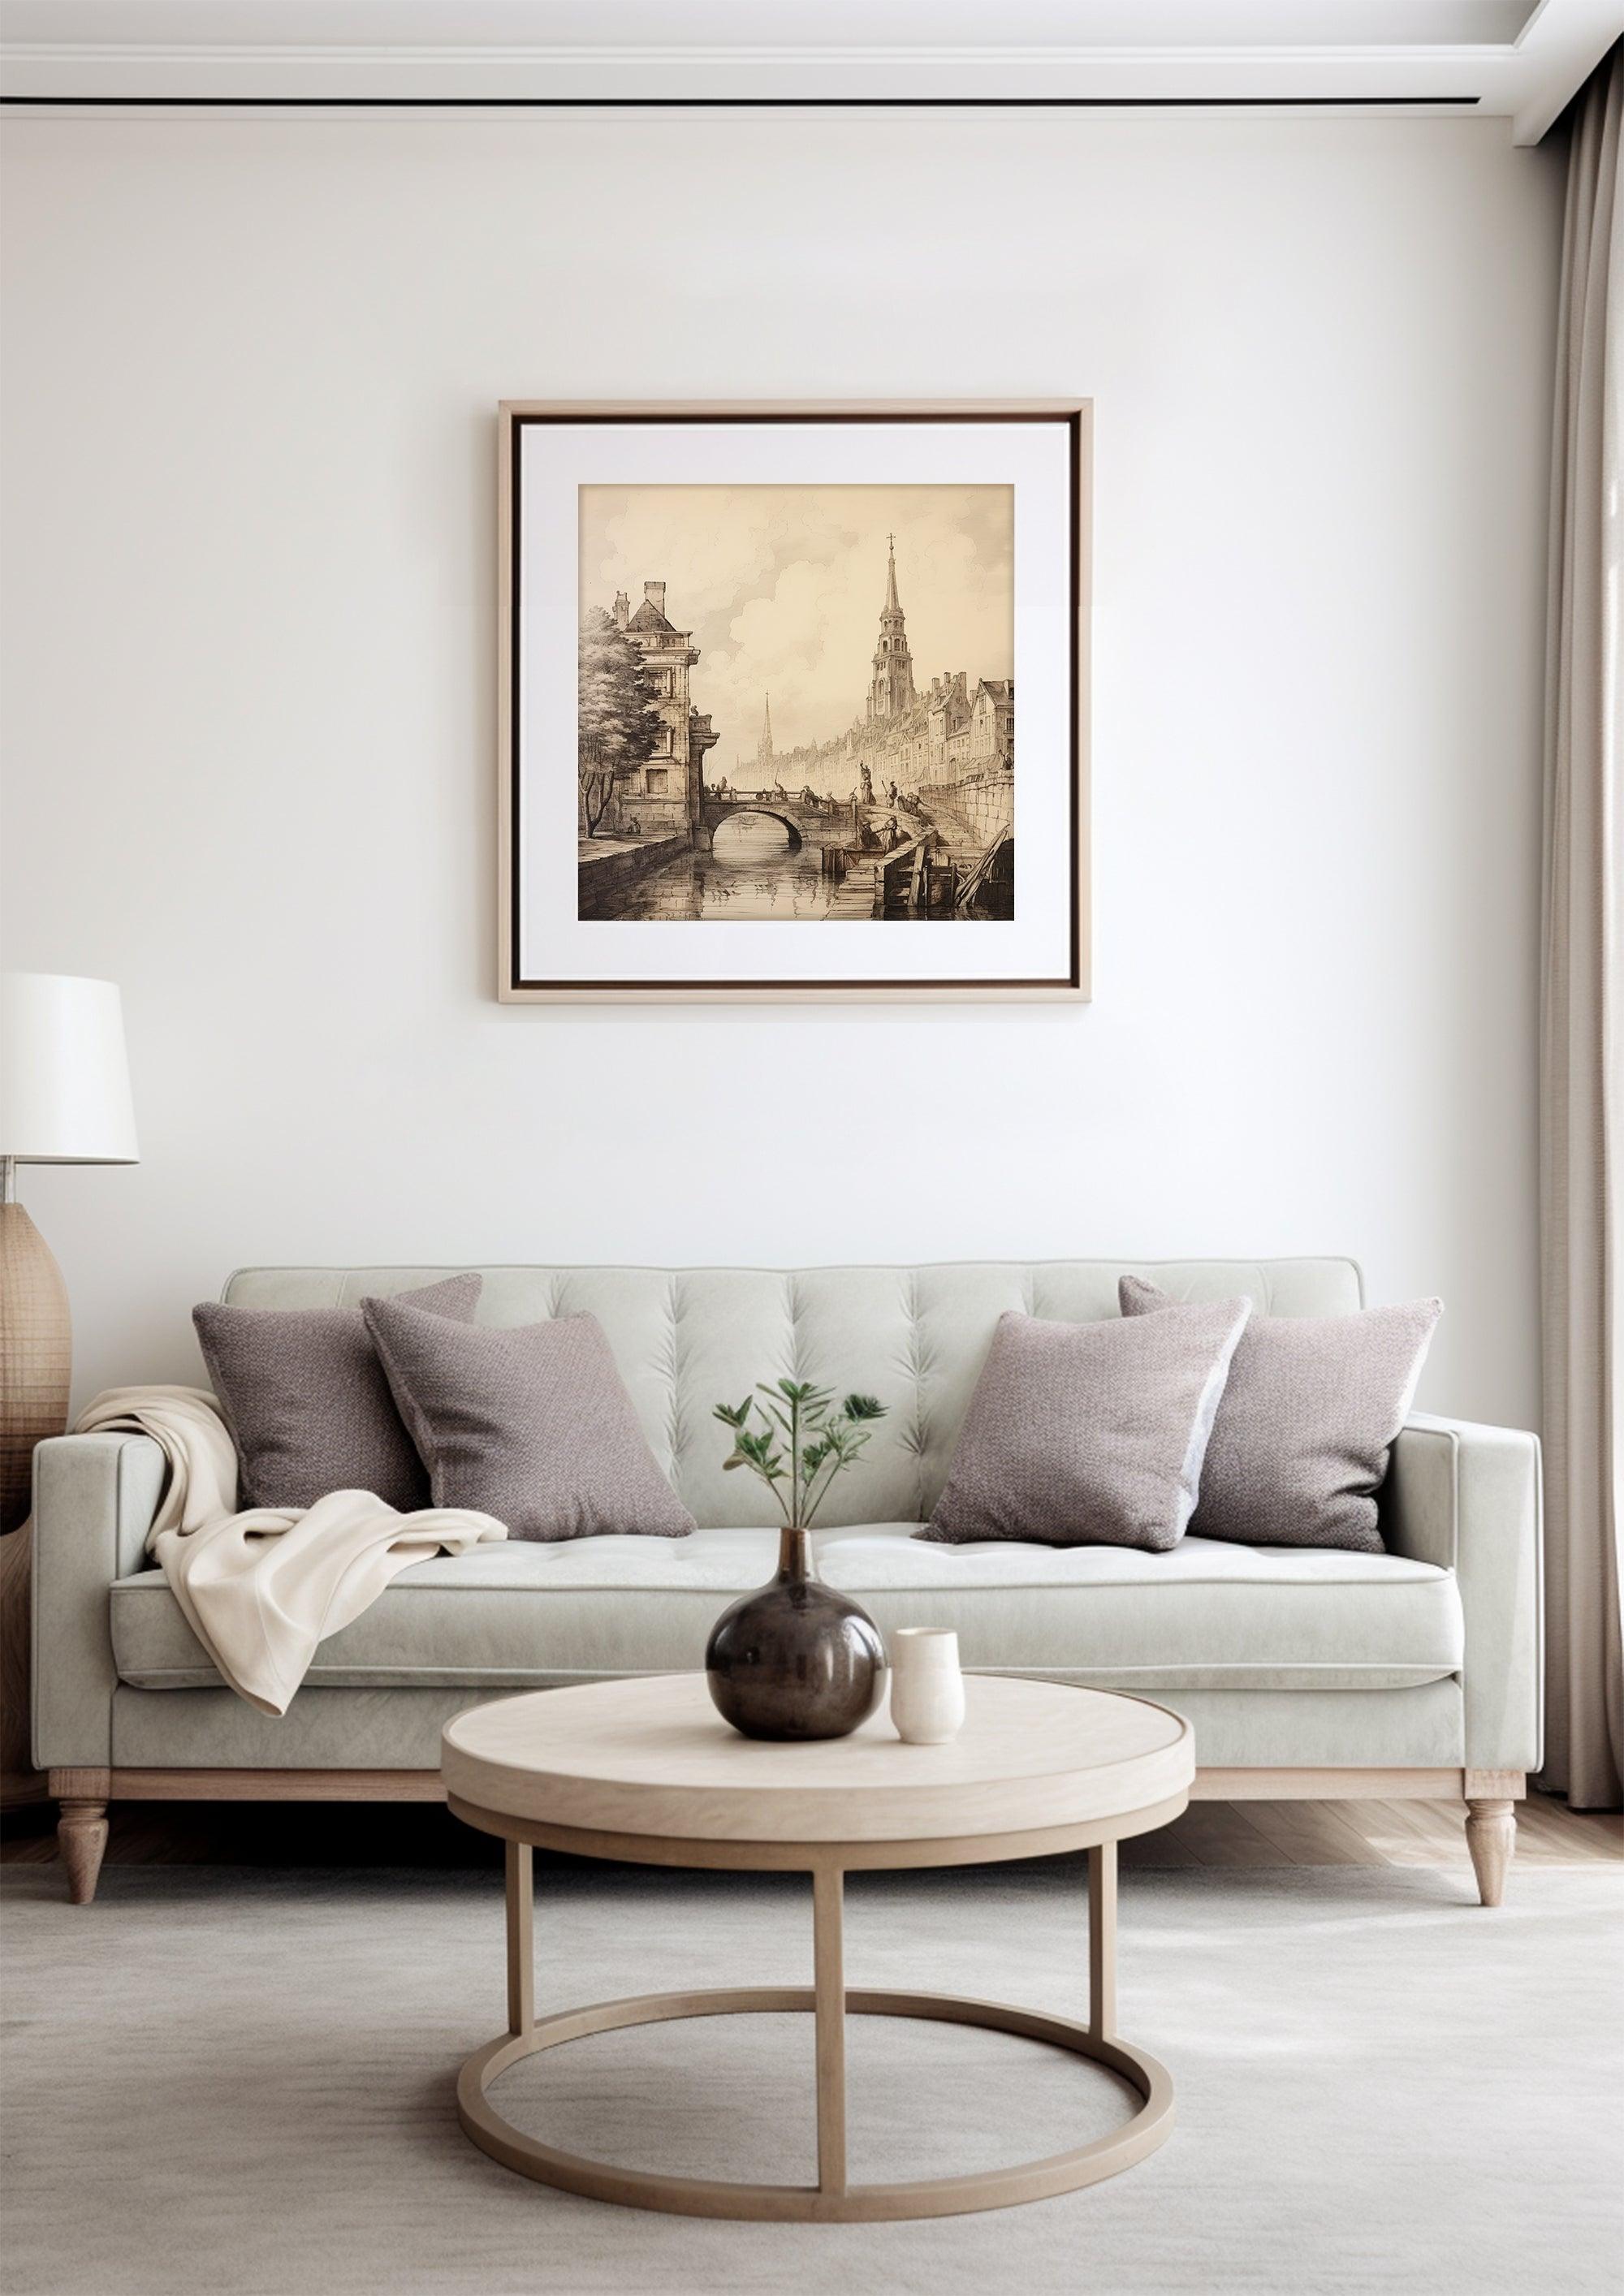 Classical Landscape | Vintage Wall Art | Sketch Etching Printing |Moody Wall Decor |Home Decor Aesthetics|Study Living Room Decoration Print|PRINTABLE Art |Digital Download